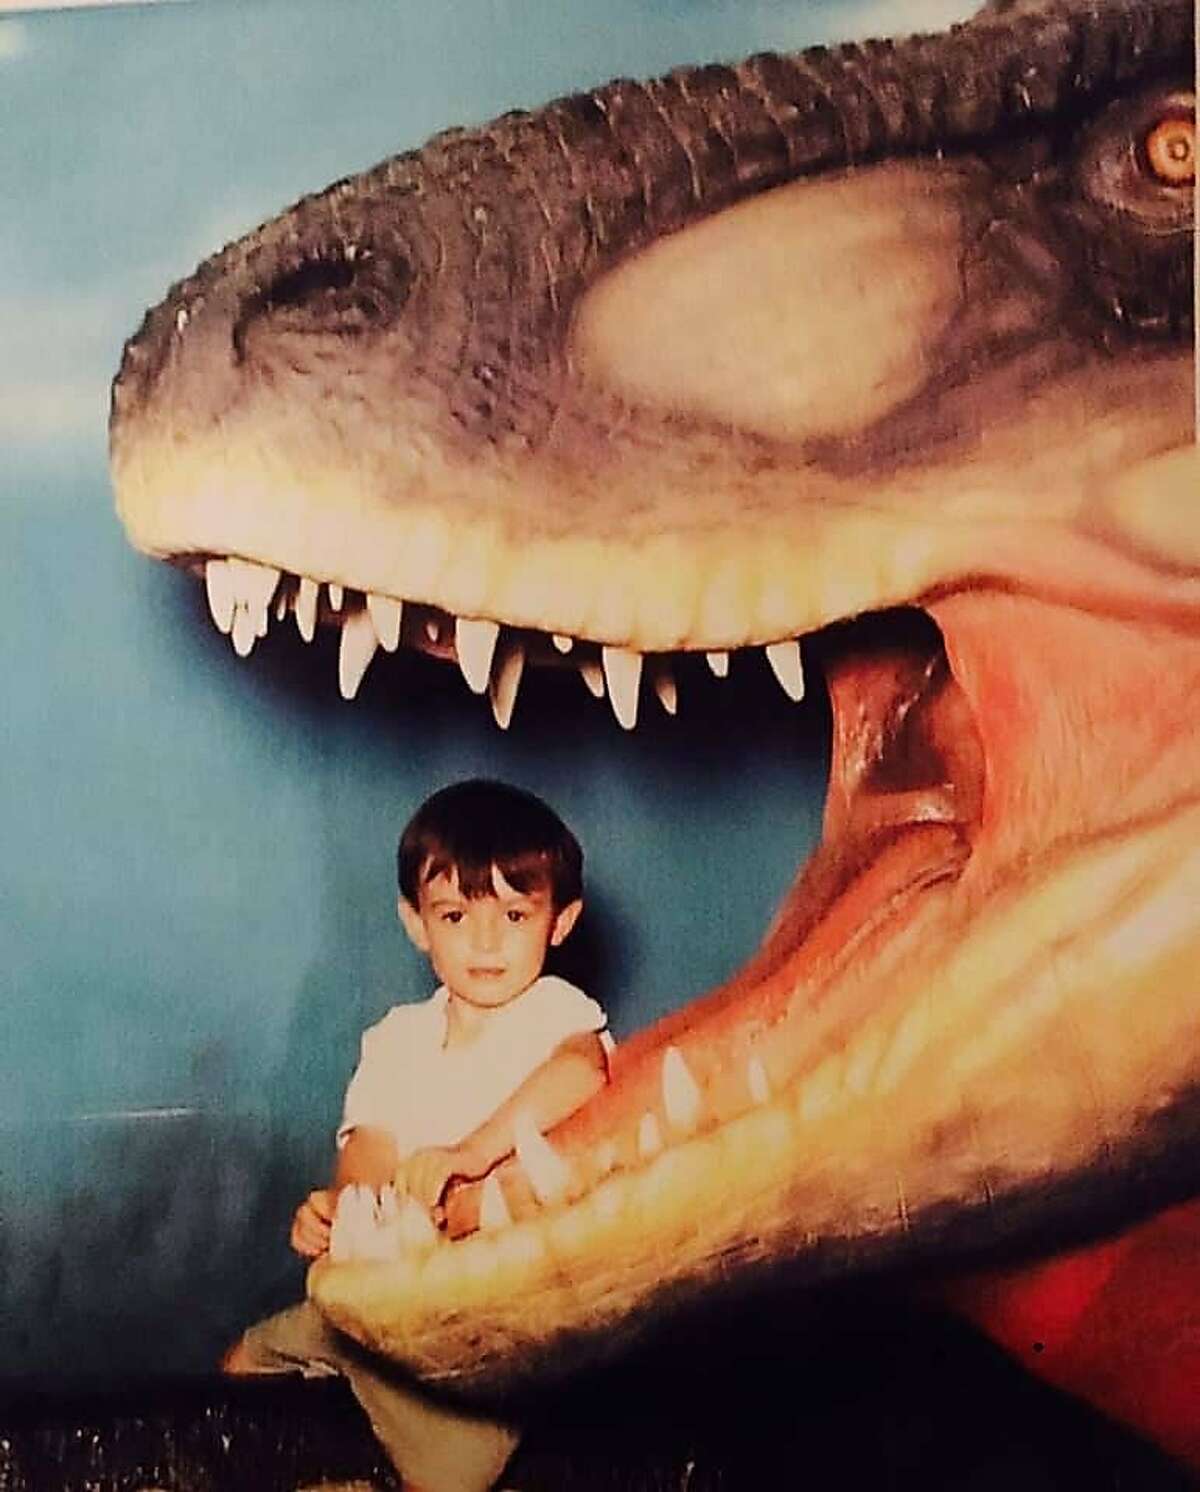 Duran's interest in dinosaurs dates back to his childhood.